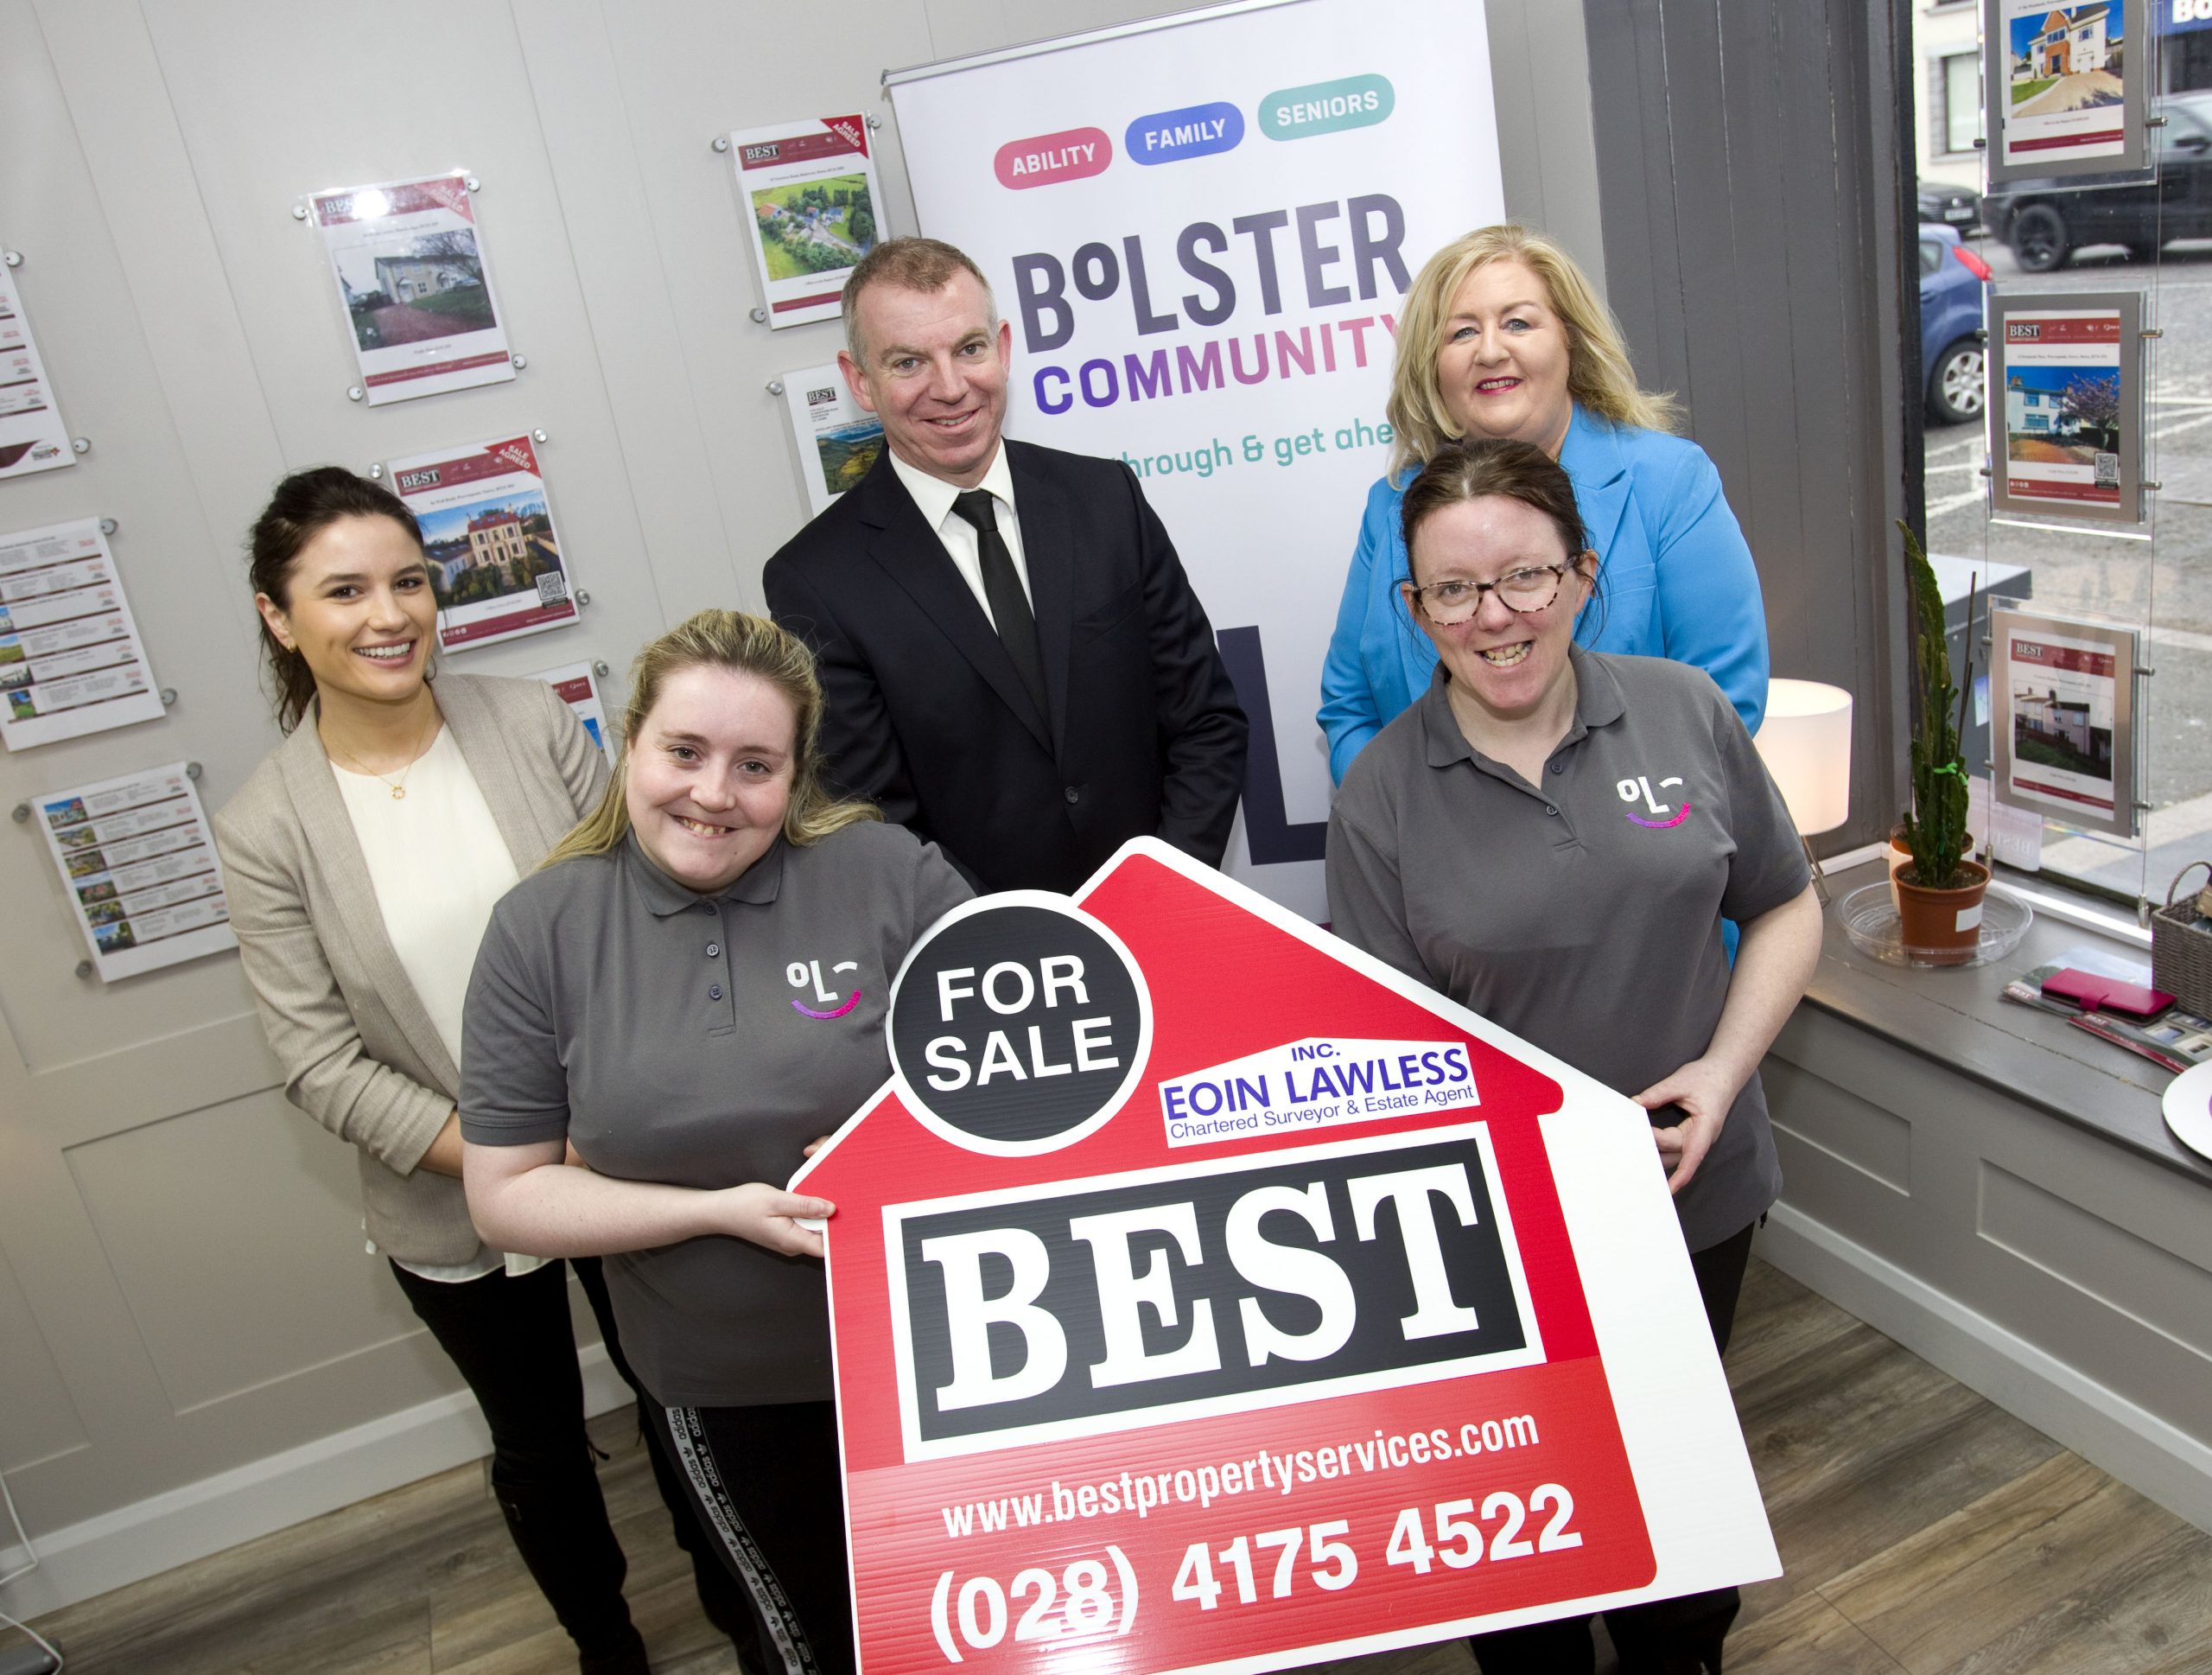 Bolster Community announces Charity Partnership with BEST Property Services